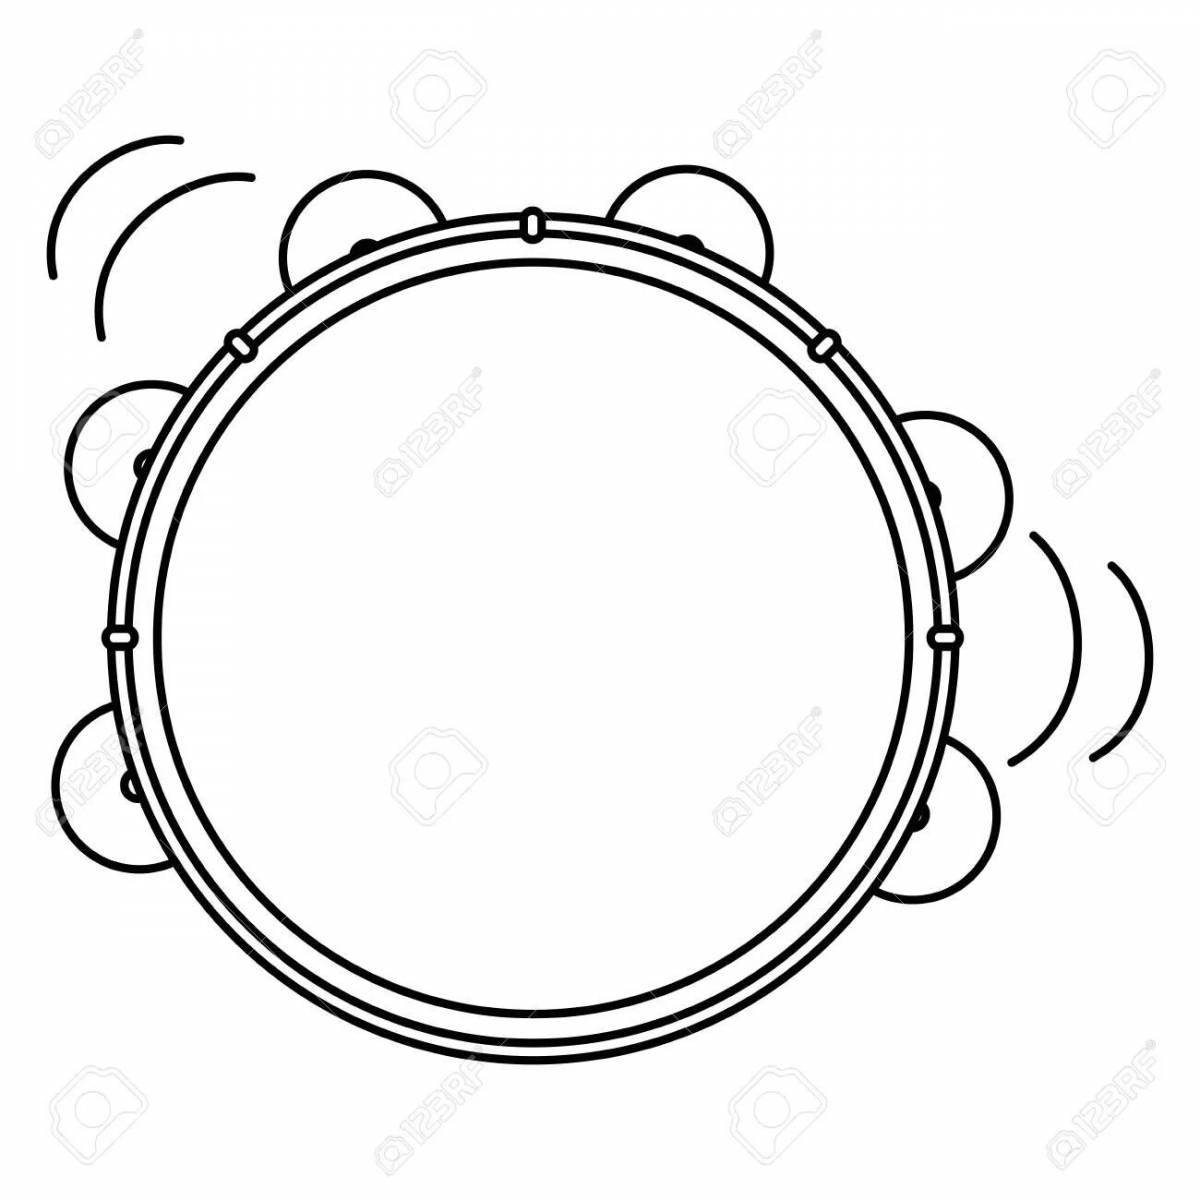 Festive tambourine coloring page